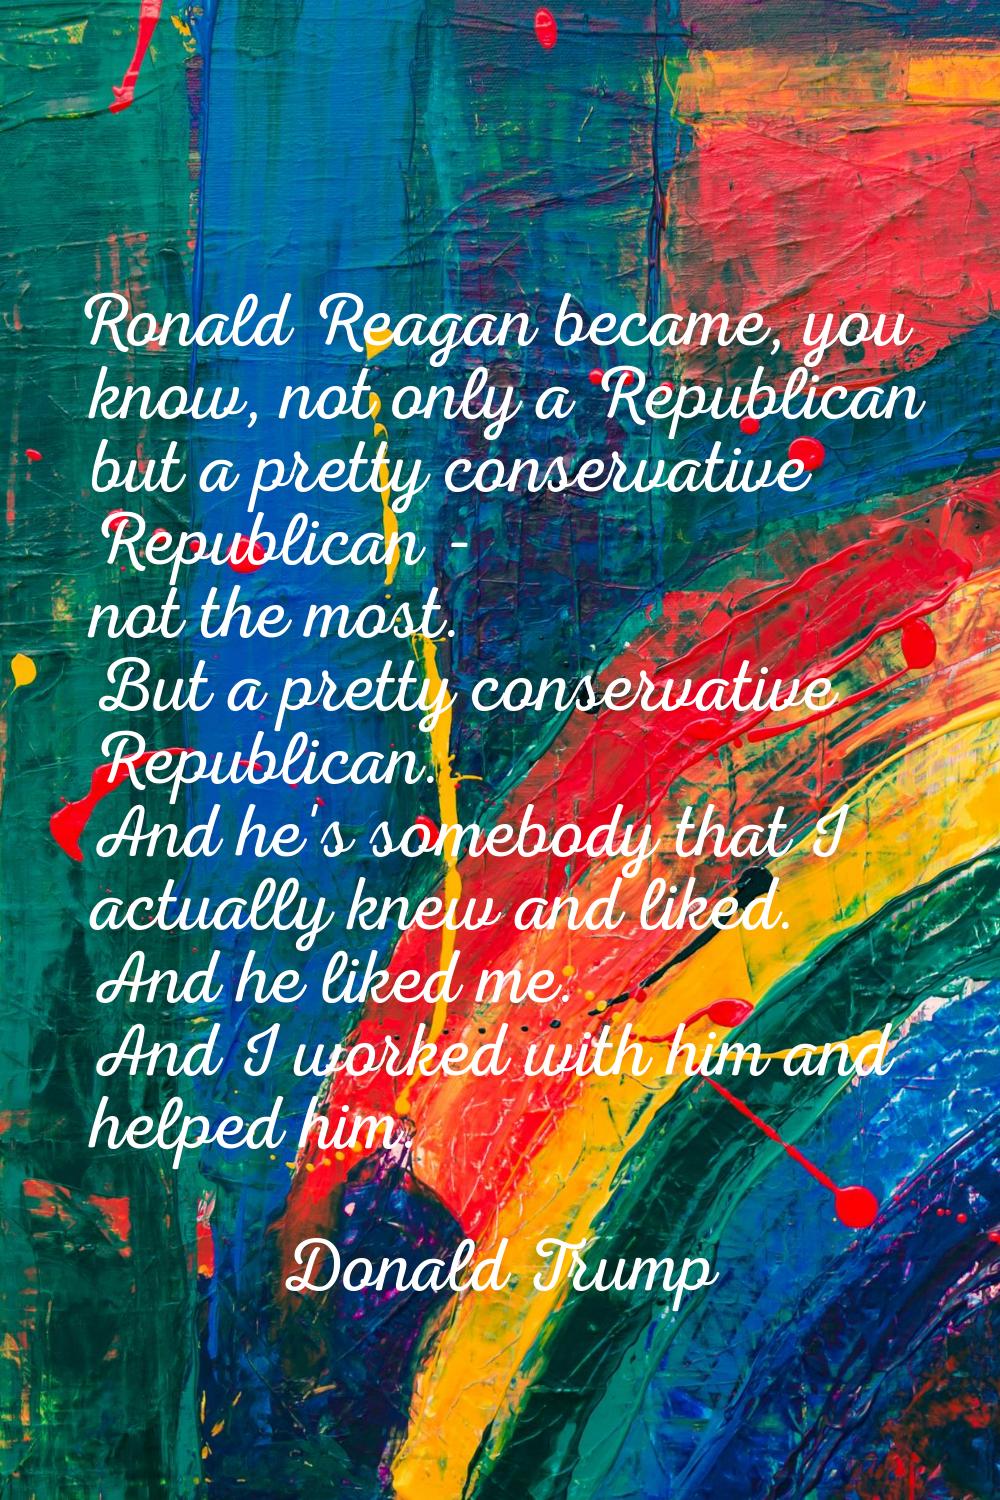 Ronald Reagan became, you know, not only a Republican but a pretty conservative Republican - not th